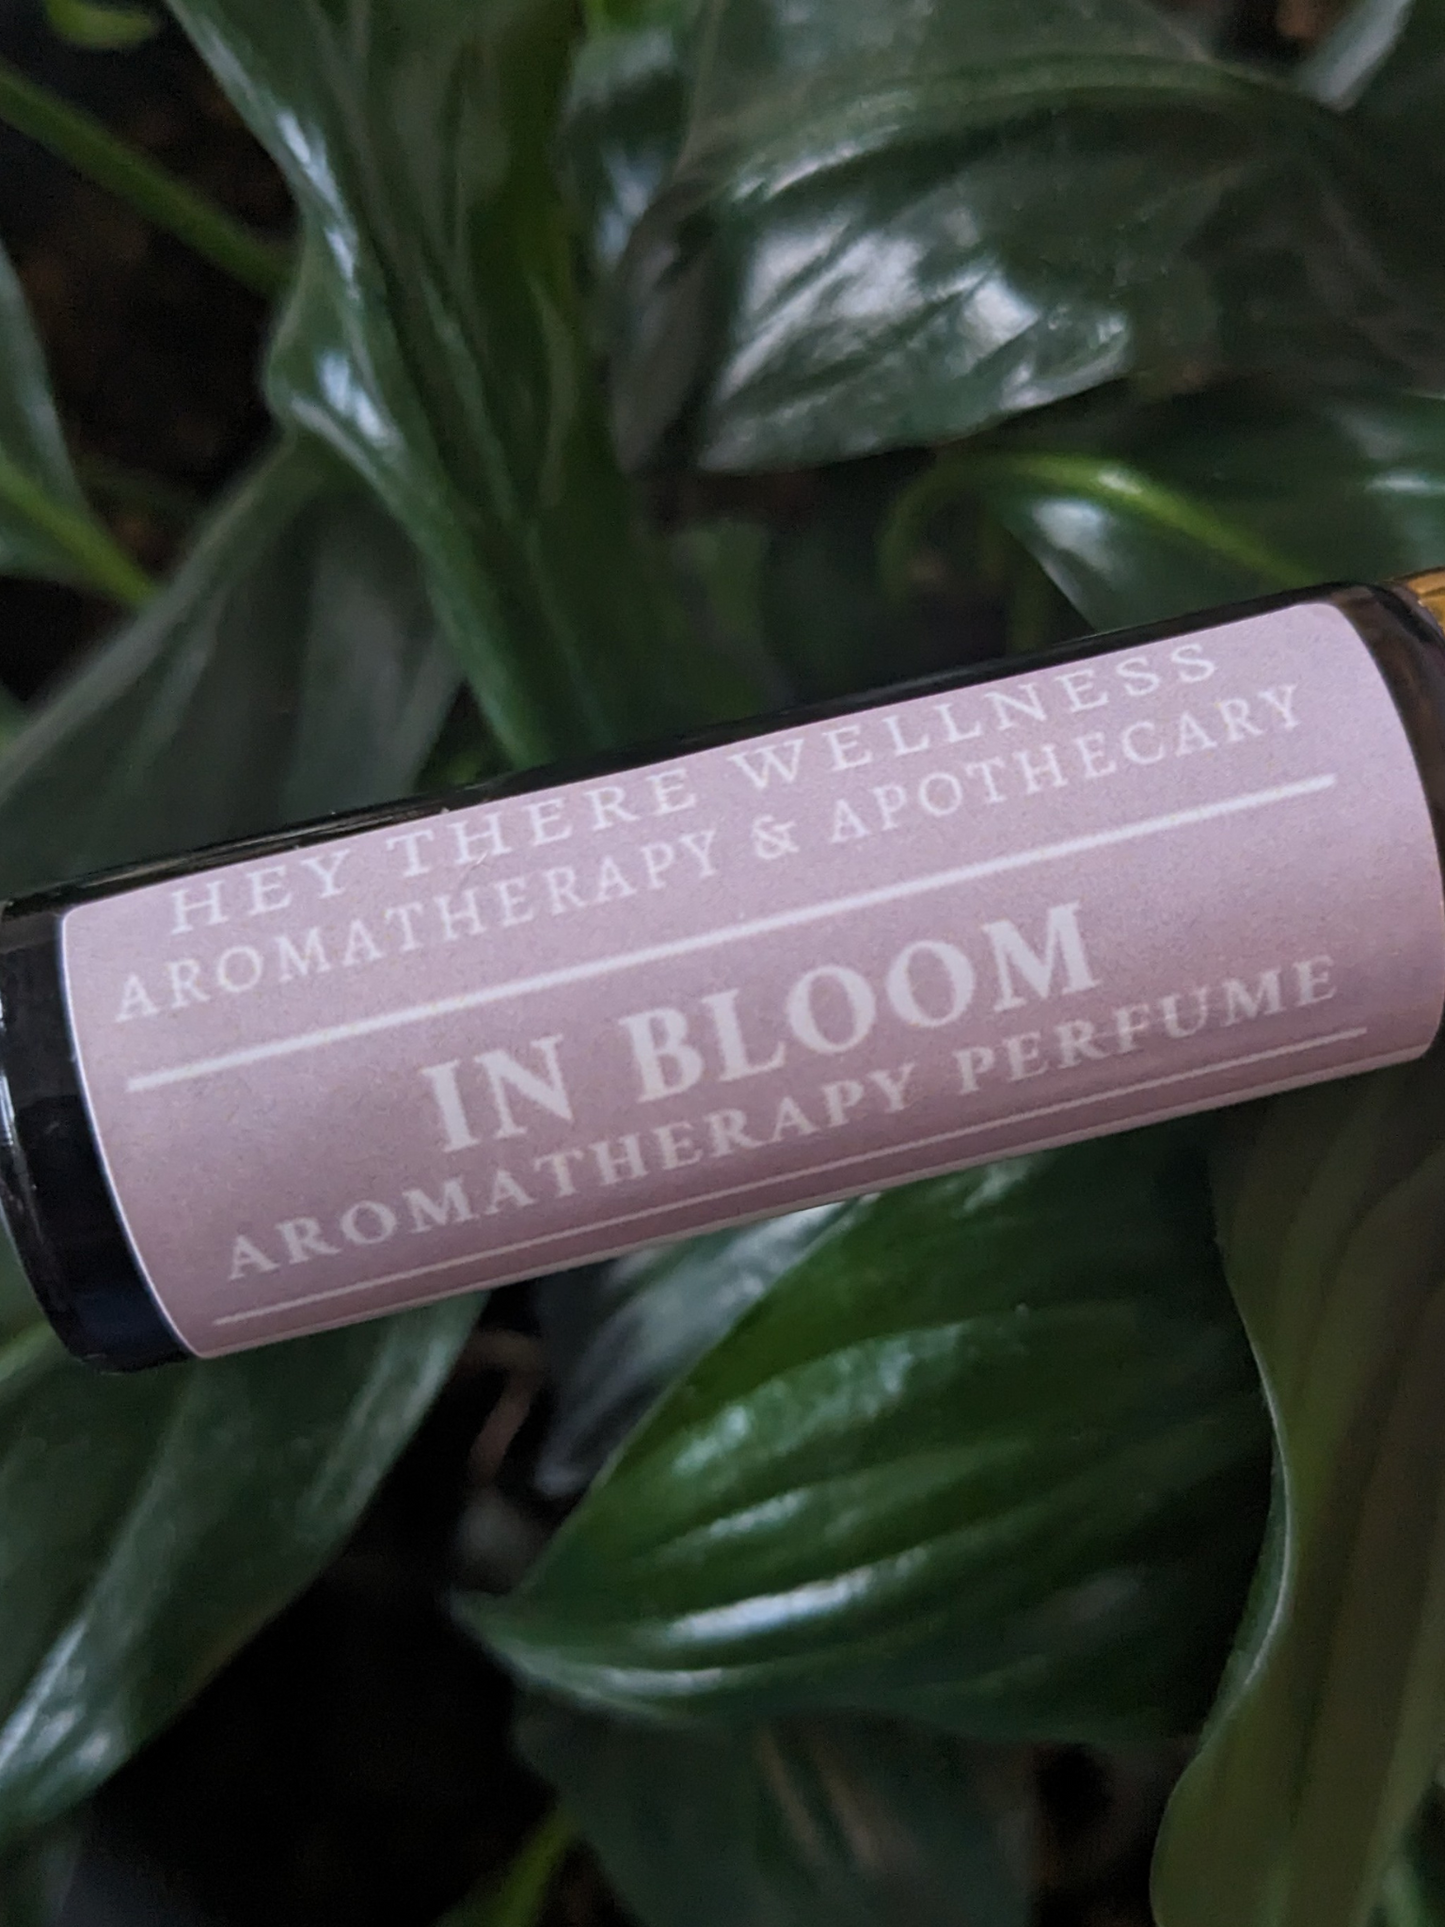 In Bloom | Aromatherapy Perfume